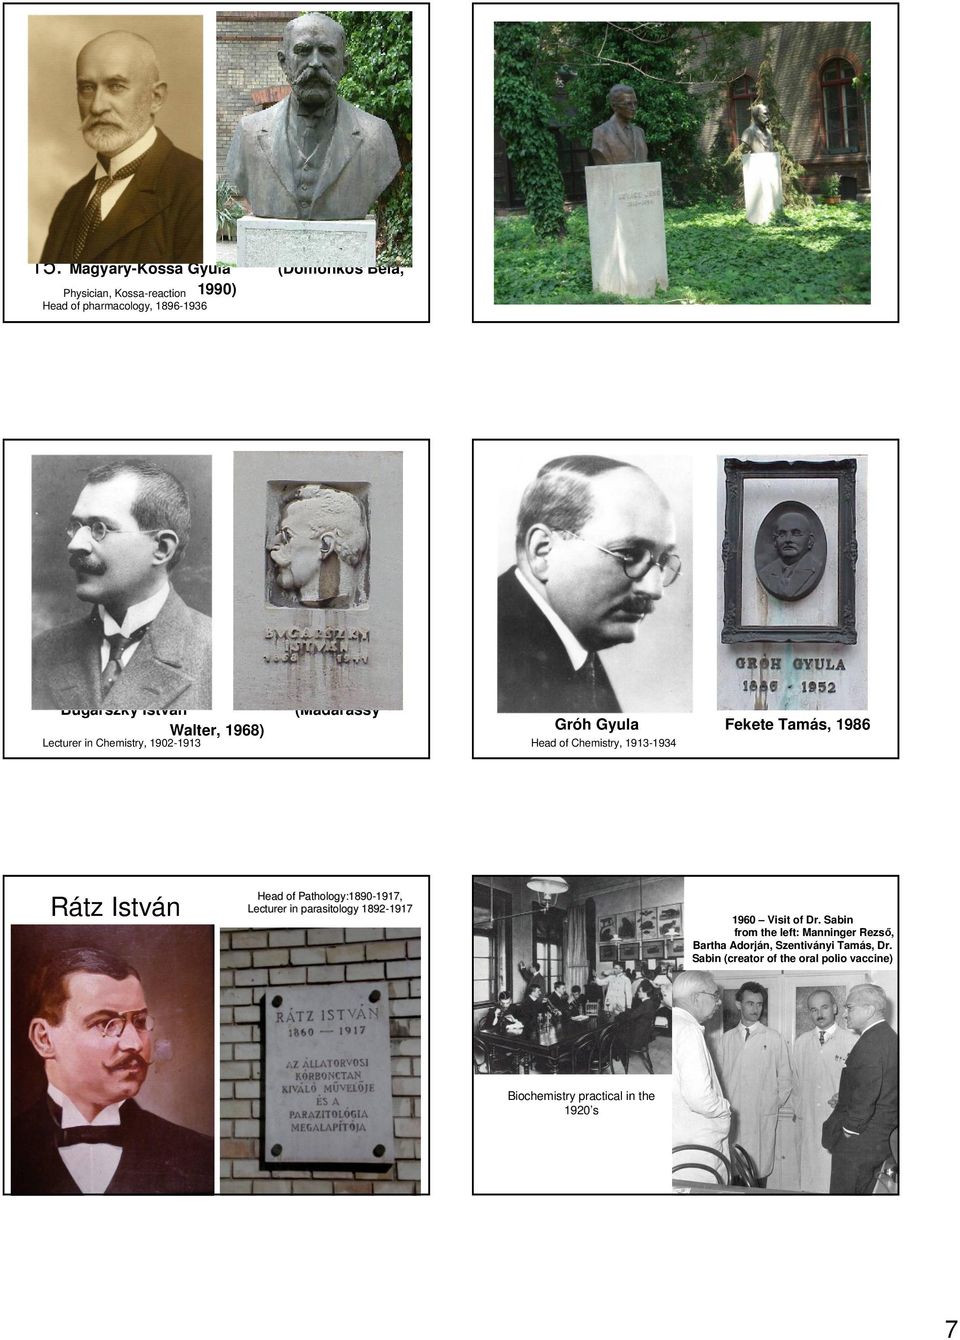 István Head of Pathology:1890 :1890-1917, 1917, Lecturer in parasitology 1892-1917 1917 1960 Visit of Dr.